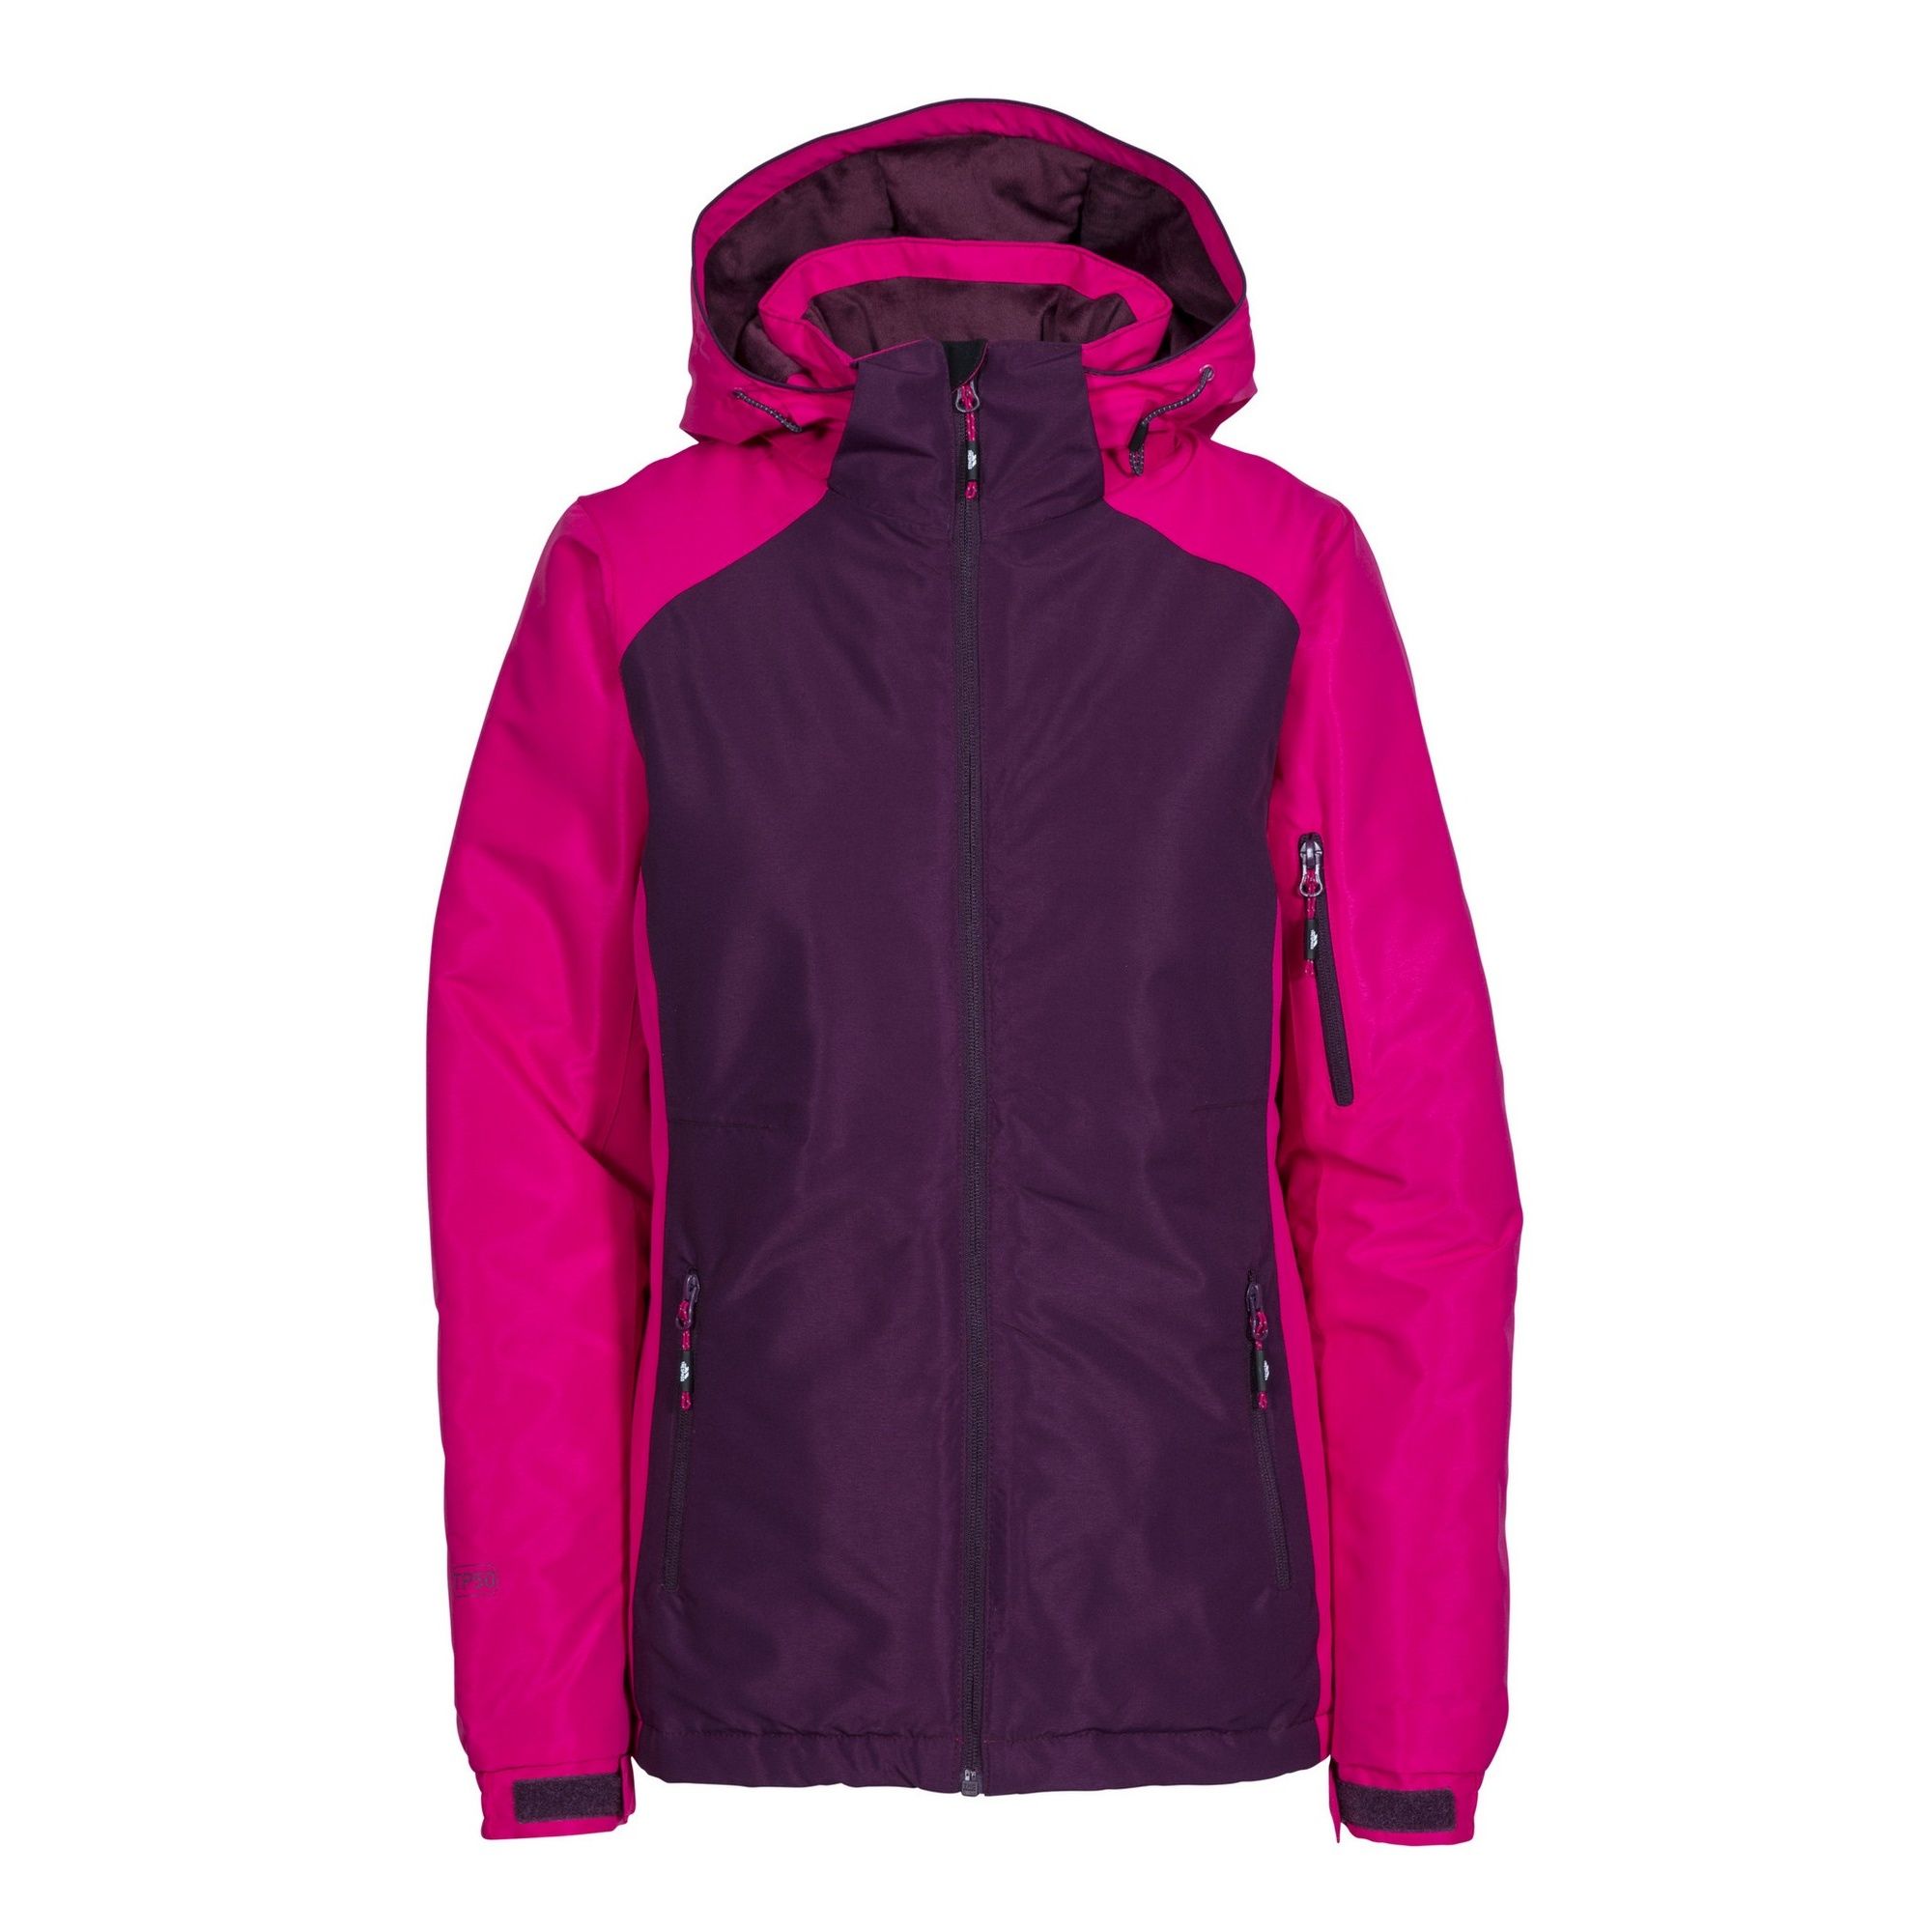 Womens ski jacket with adjustable, zip-off hood. 2 x low profile zip pockets. 1 x low profile zip sleeve pocket. C/F low profile zip. Inner storm flap. Adjustable, touch fastening cuffs. Hem drawcord. Snow skirt. Taped seams. Ideal for wearing outside on a cold day. Outer: 100% Polyester Taslan TPU Membrane. Lining: Polyester/Polyamide. Filling: 100% Polyester.